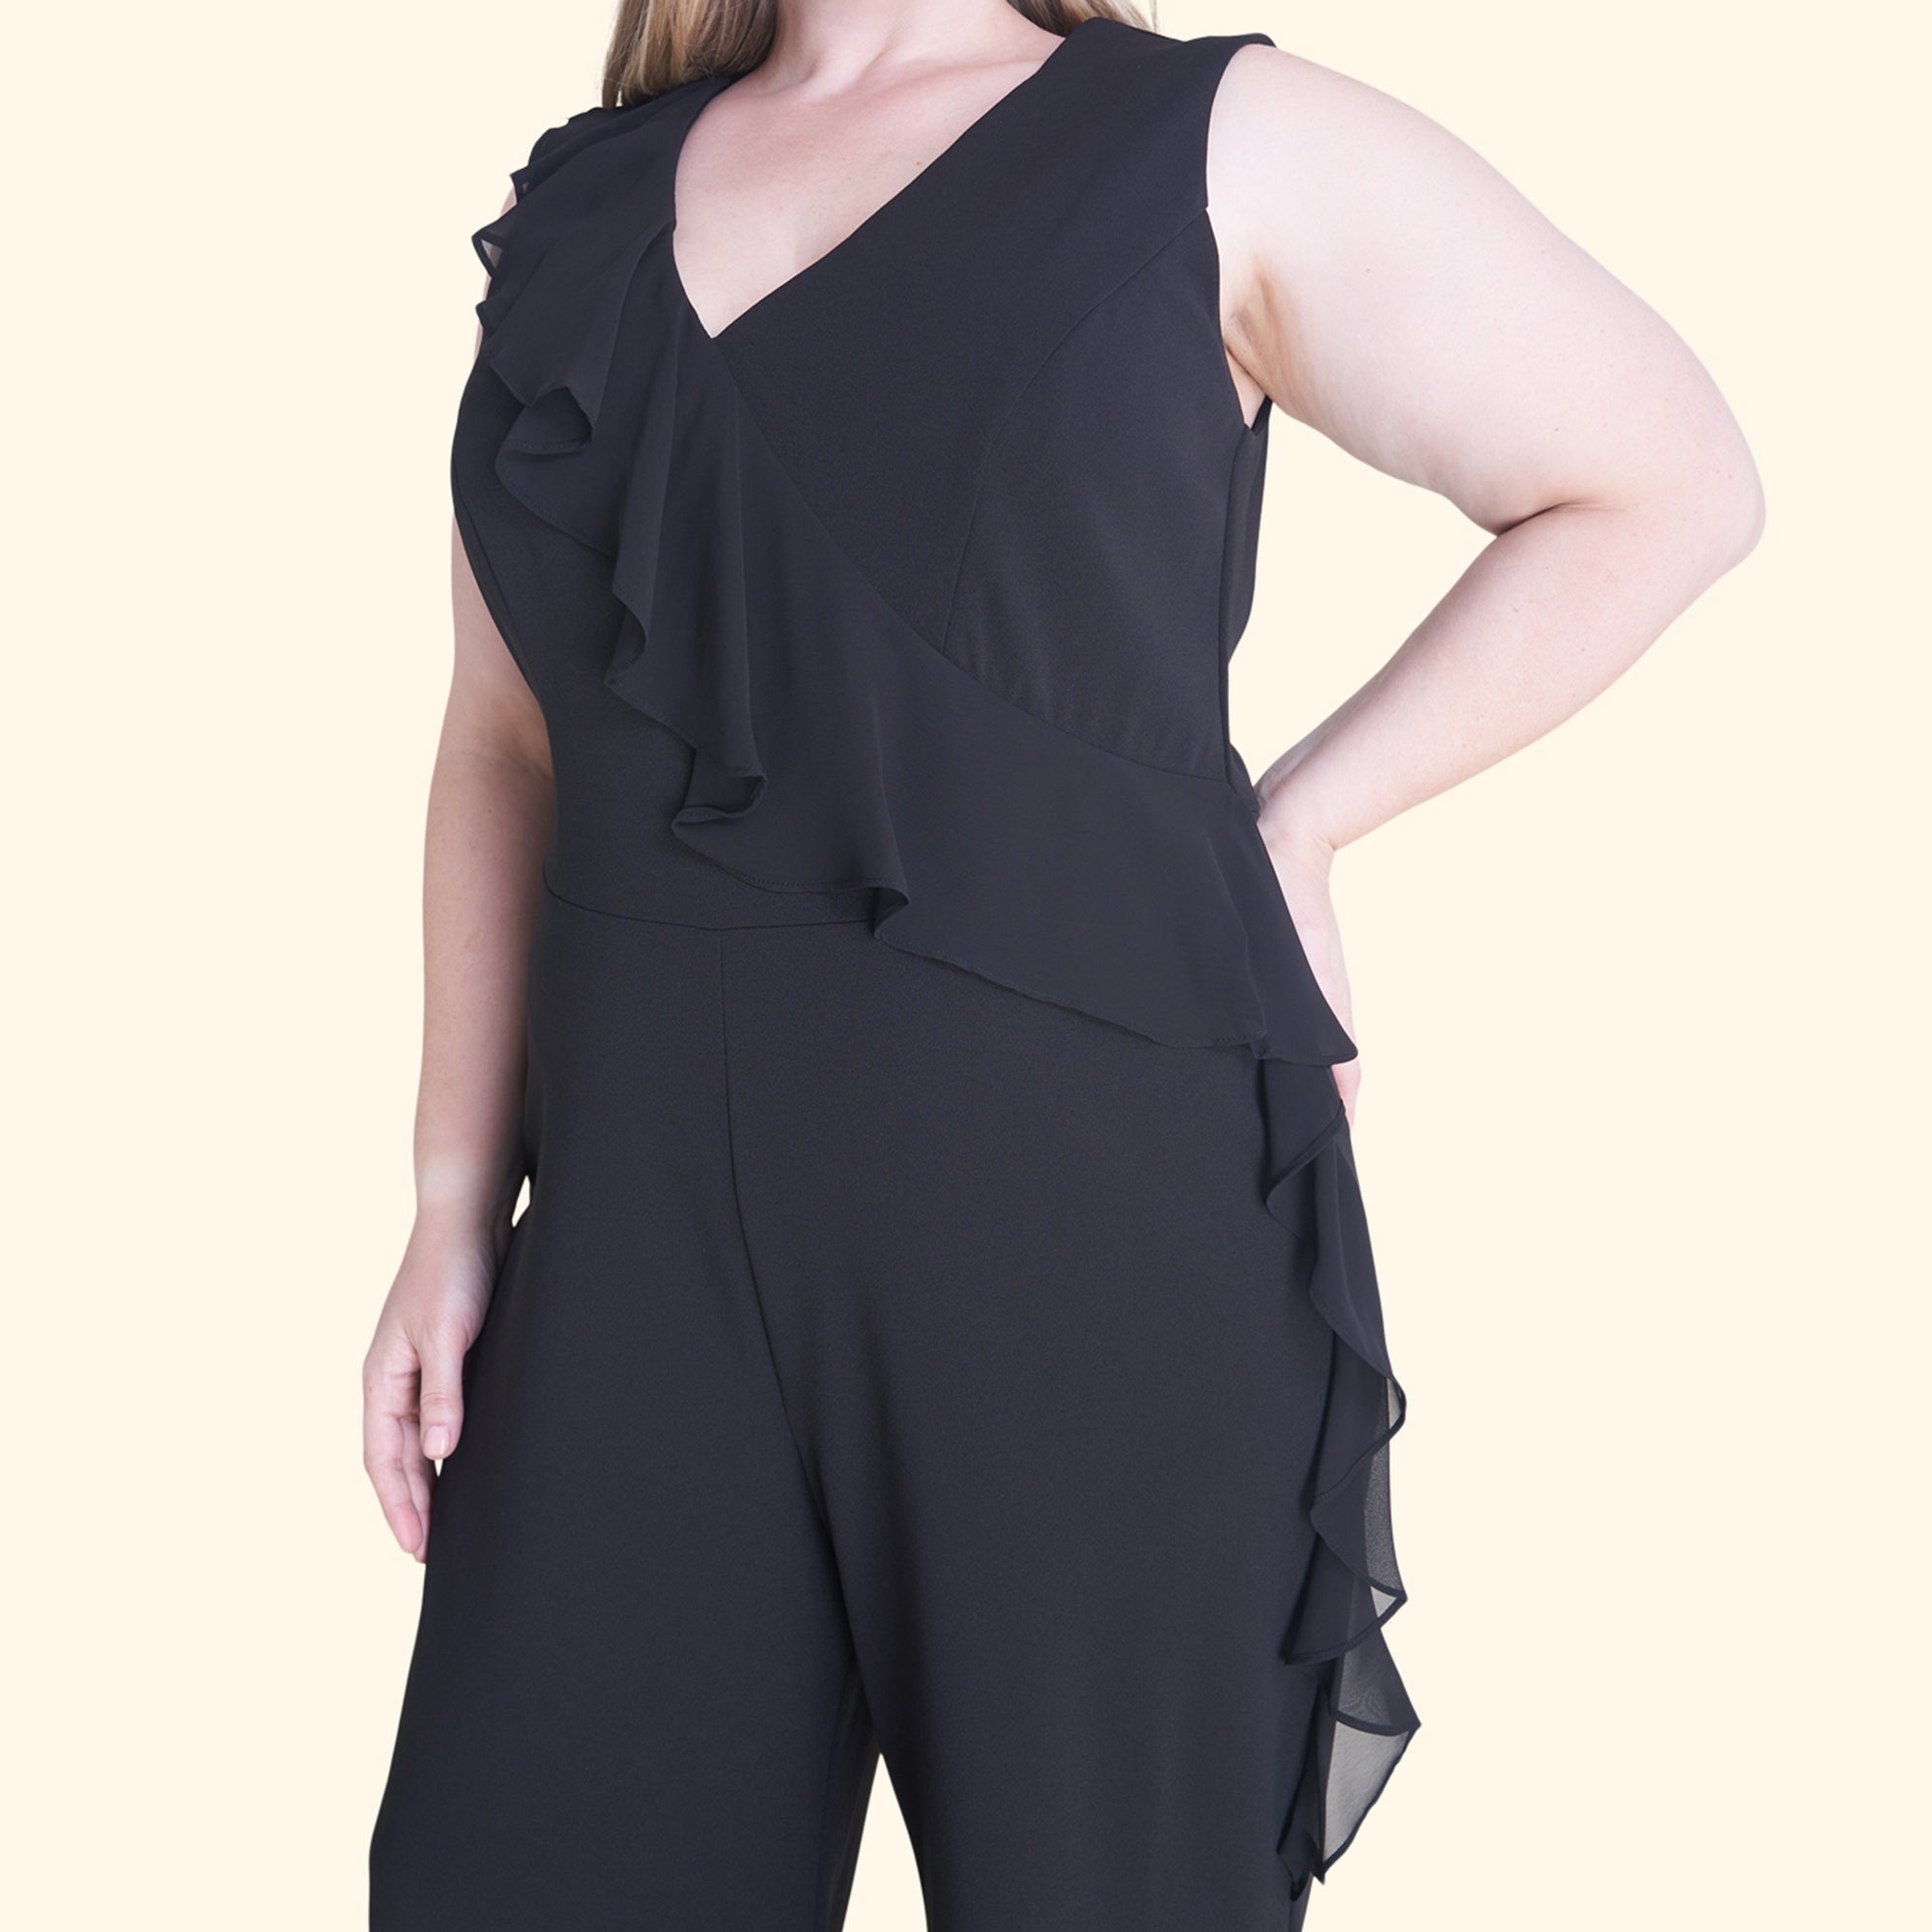 Woman posing wearing Black Sara Black Jumpsuit from Connected Apparel